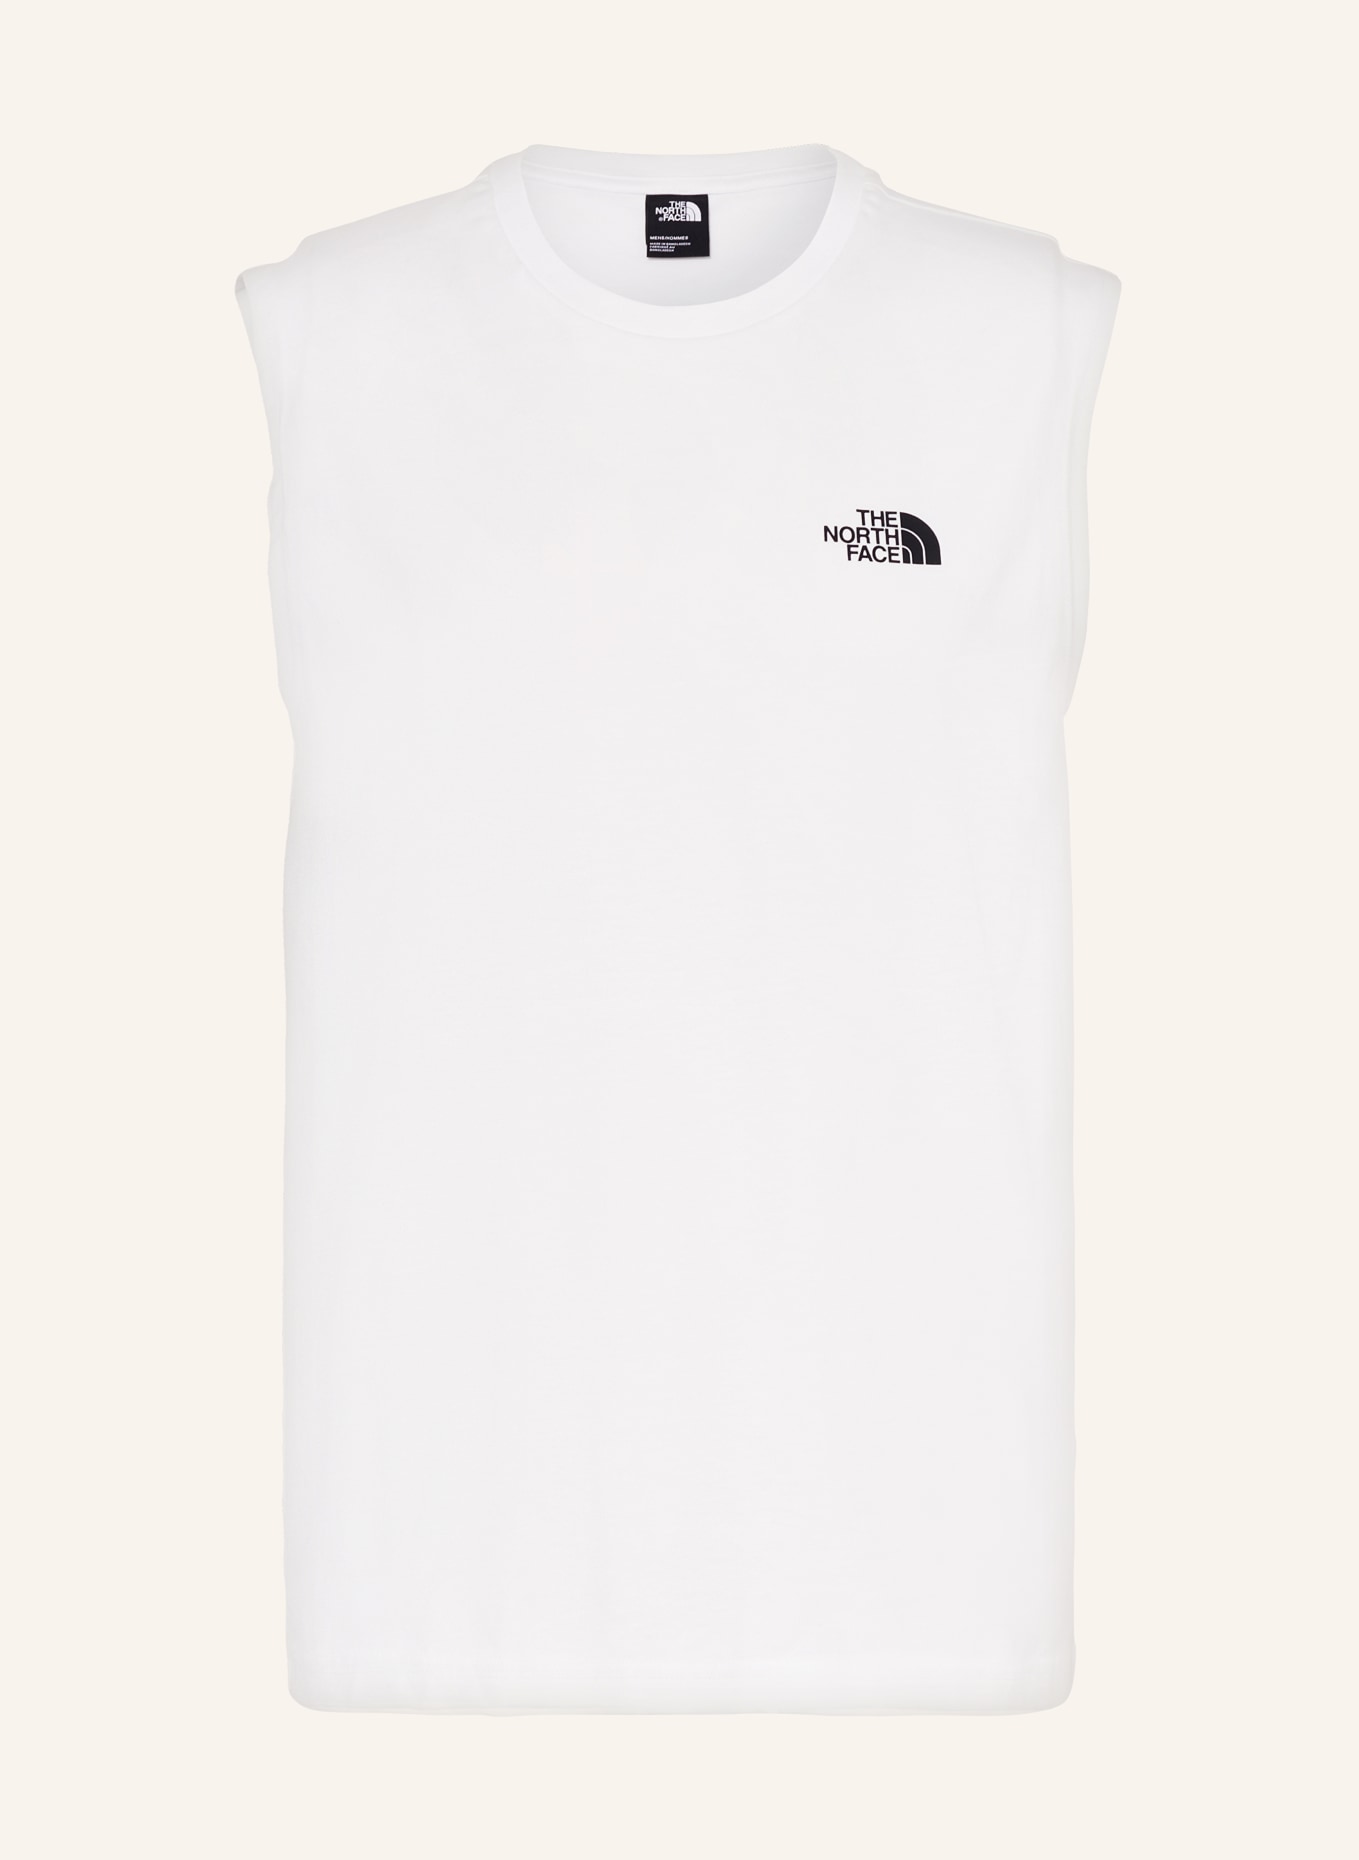 THE NORTH FACE Oversized-Tanktop SIMPLE DOME, Farbe: WEISS (Bild 1)